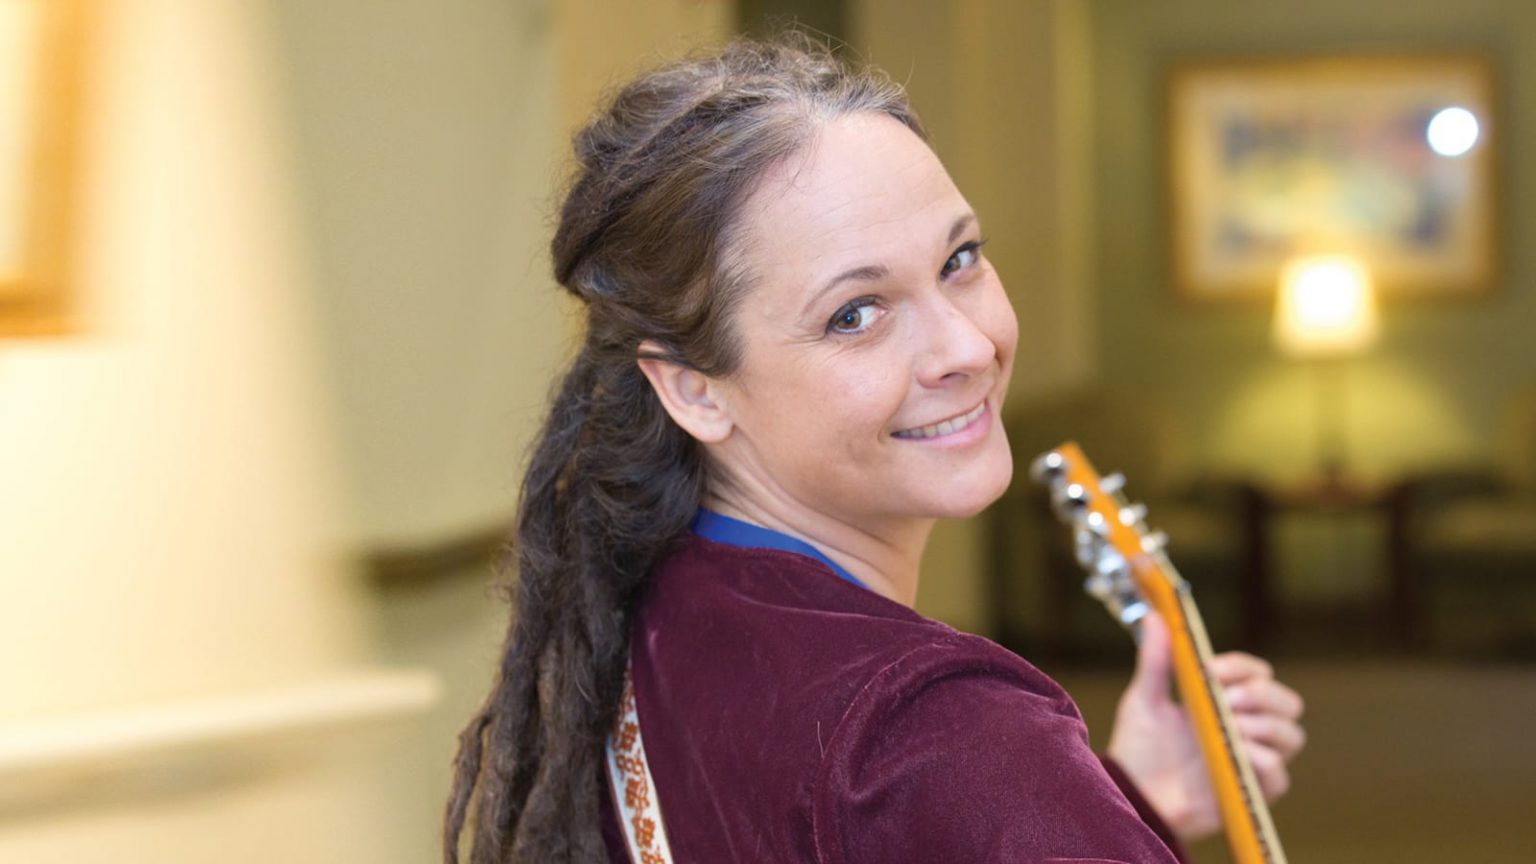 Volunteer smiling and holding guitar